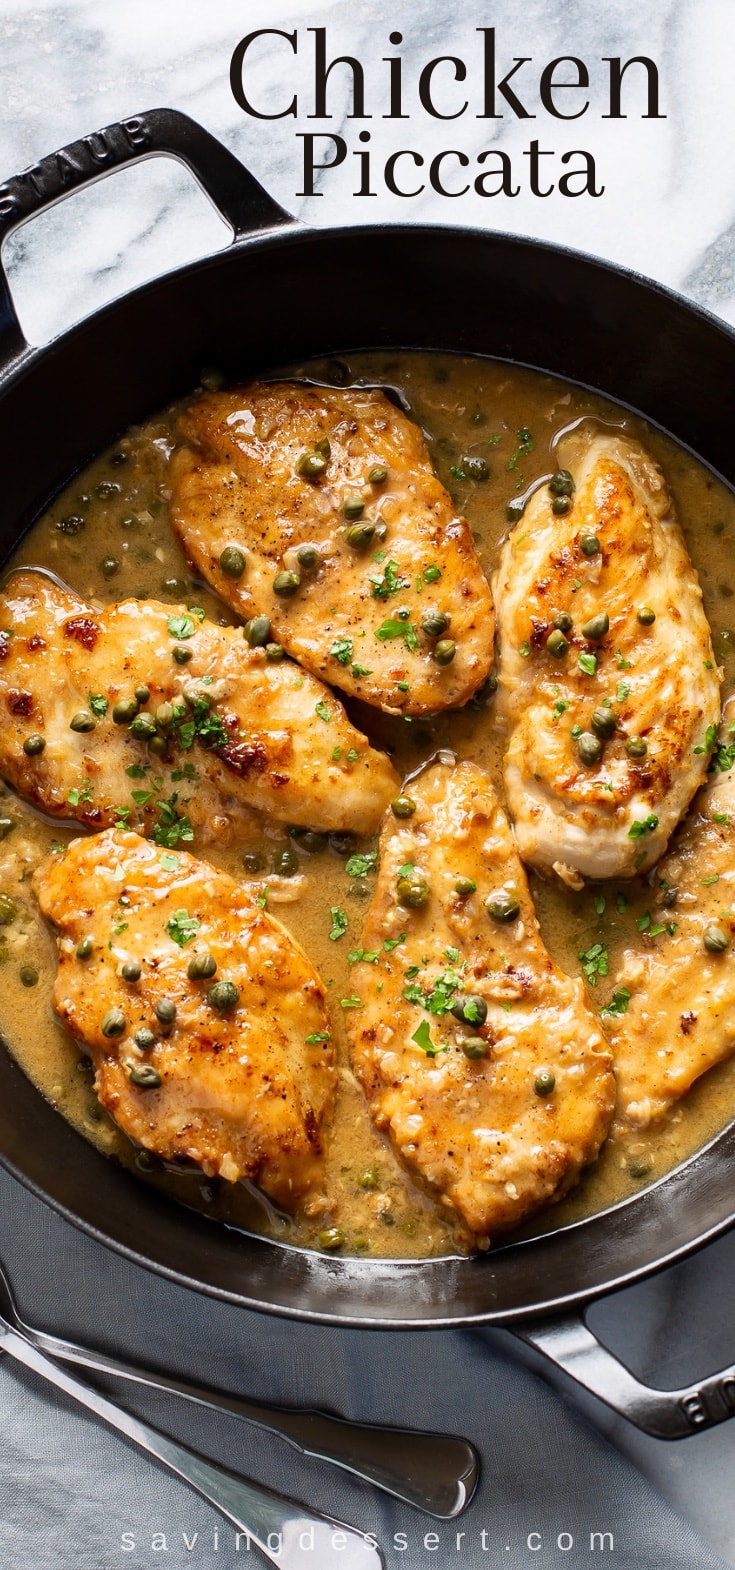 Skillet of Chicken Piccata with capers in a lemon wine sauce